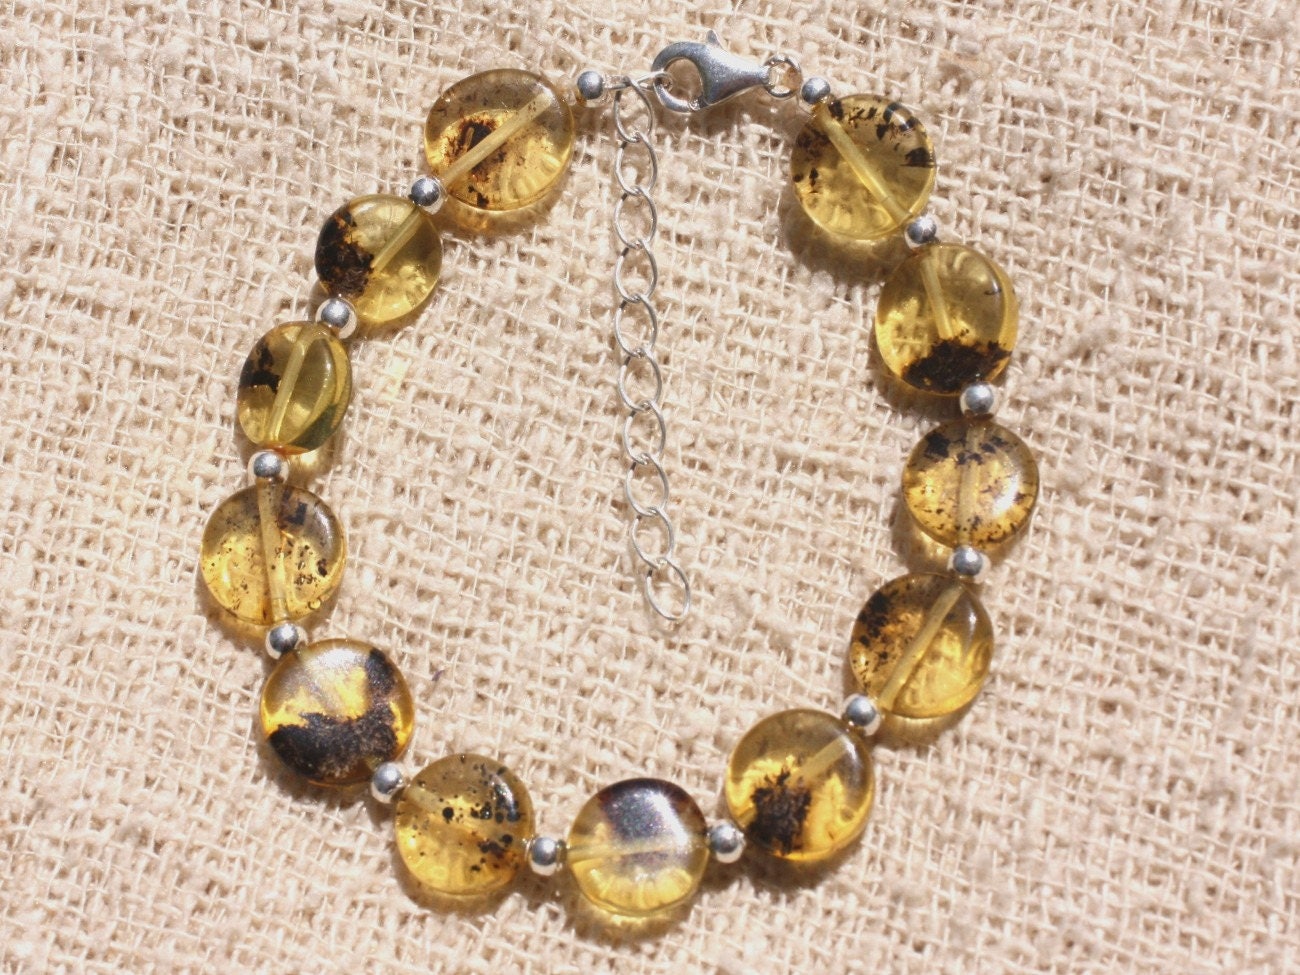 BR251  Amber Honey Crystal Strands Glass Beads Bracelet Double Magnetic Clasp